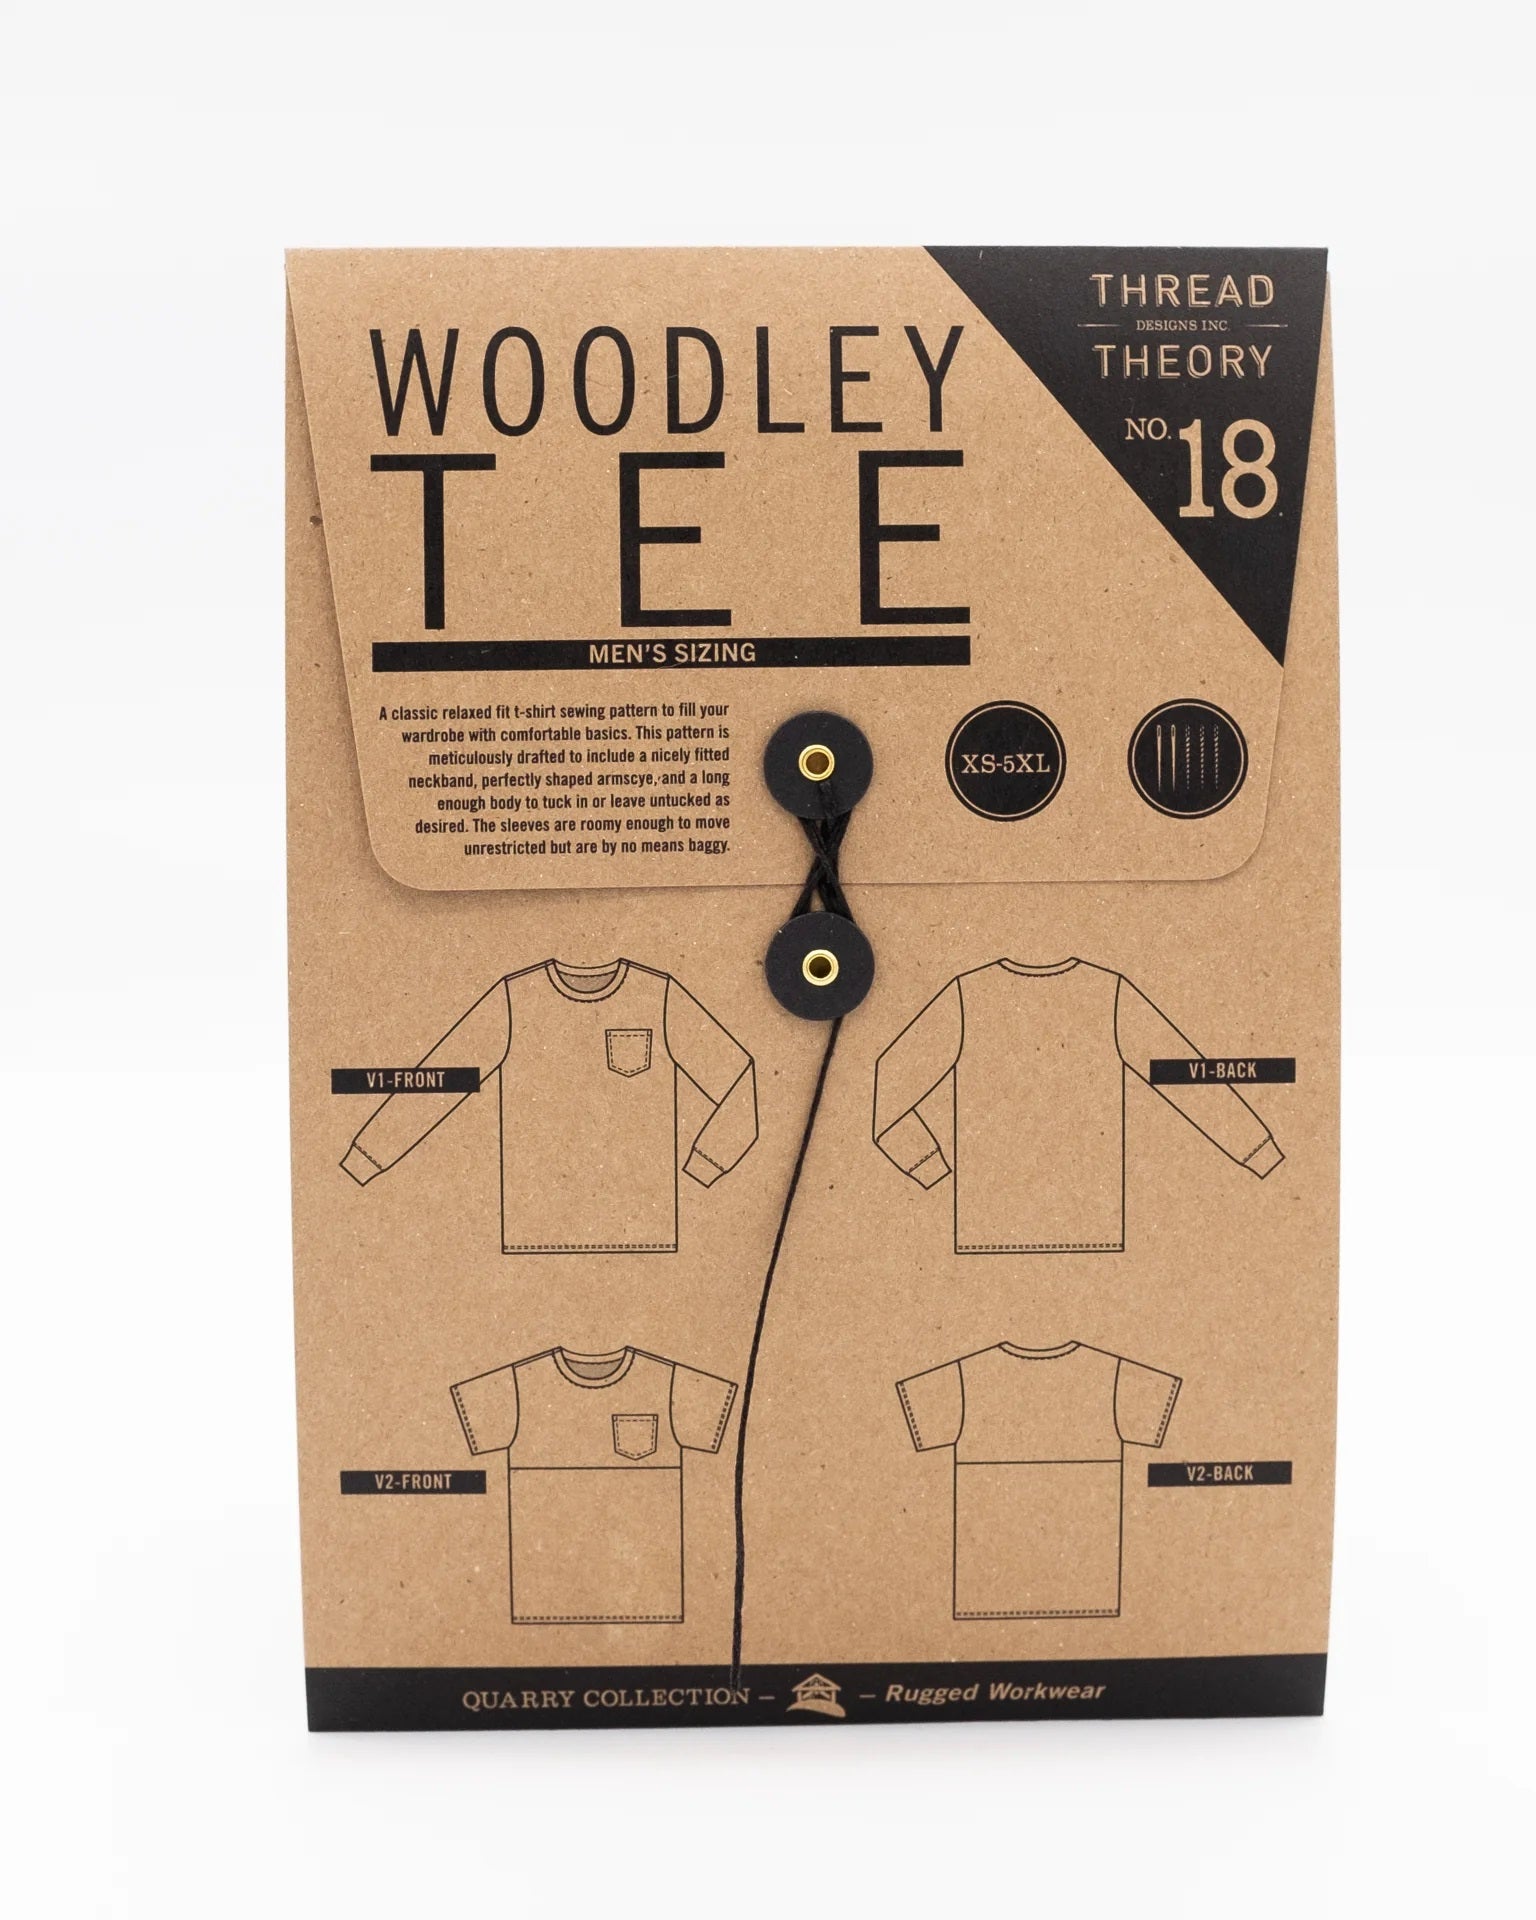 Woodly Tee Pattern by Thread Theory